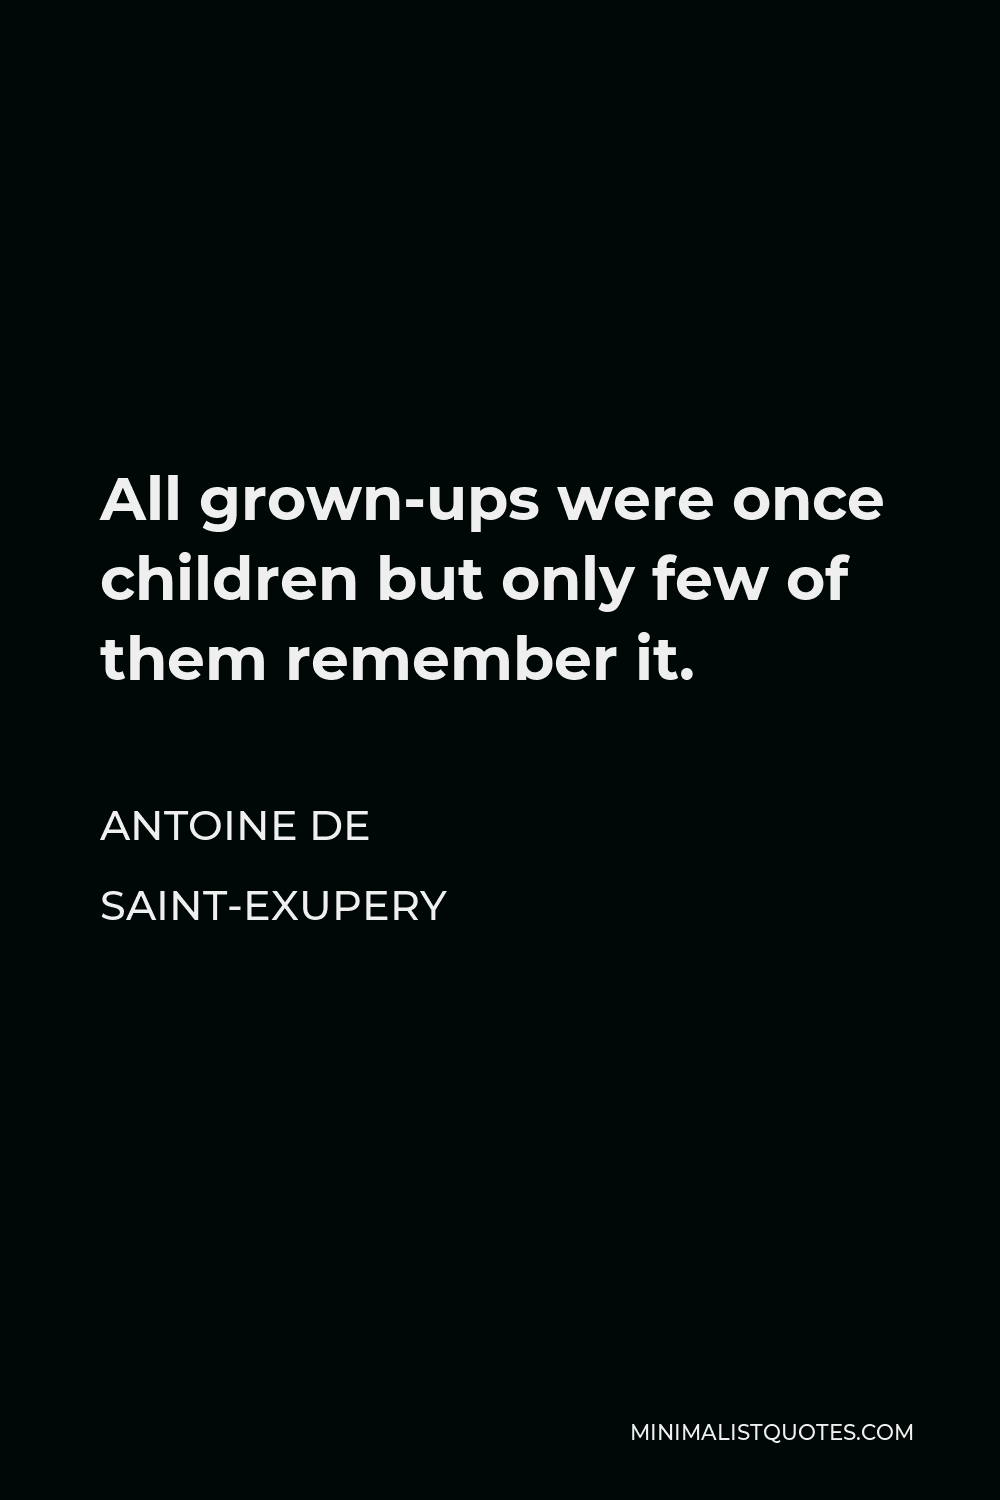 Antoine de Saint-Exupery Quote - All grown-ups were once children… but only few of them remember it.